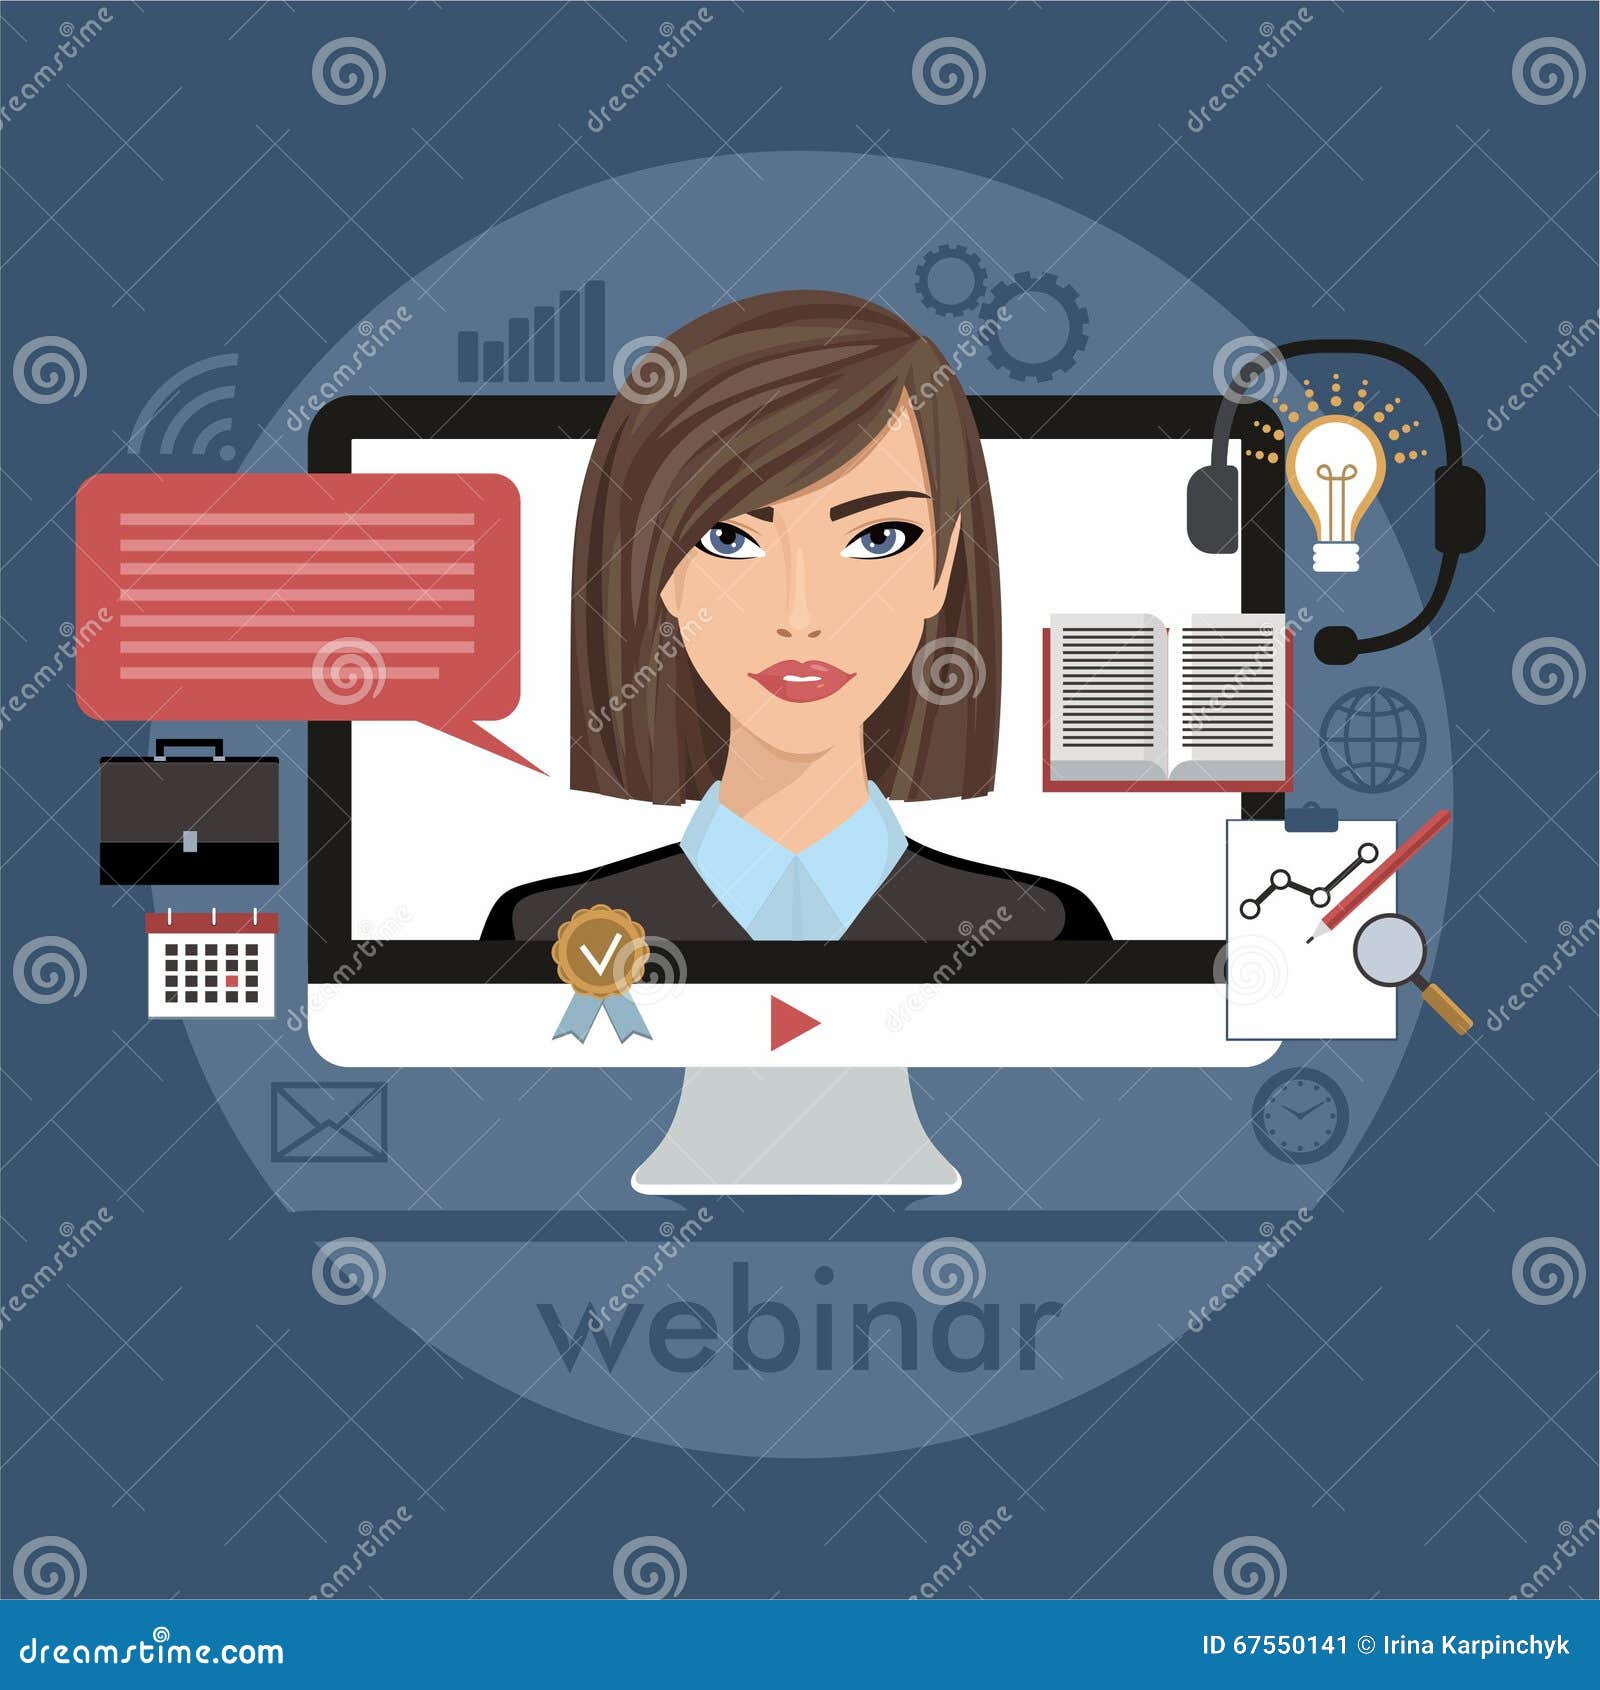 flat  colorful  concept for webinar, online learning, lectures in internet in 